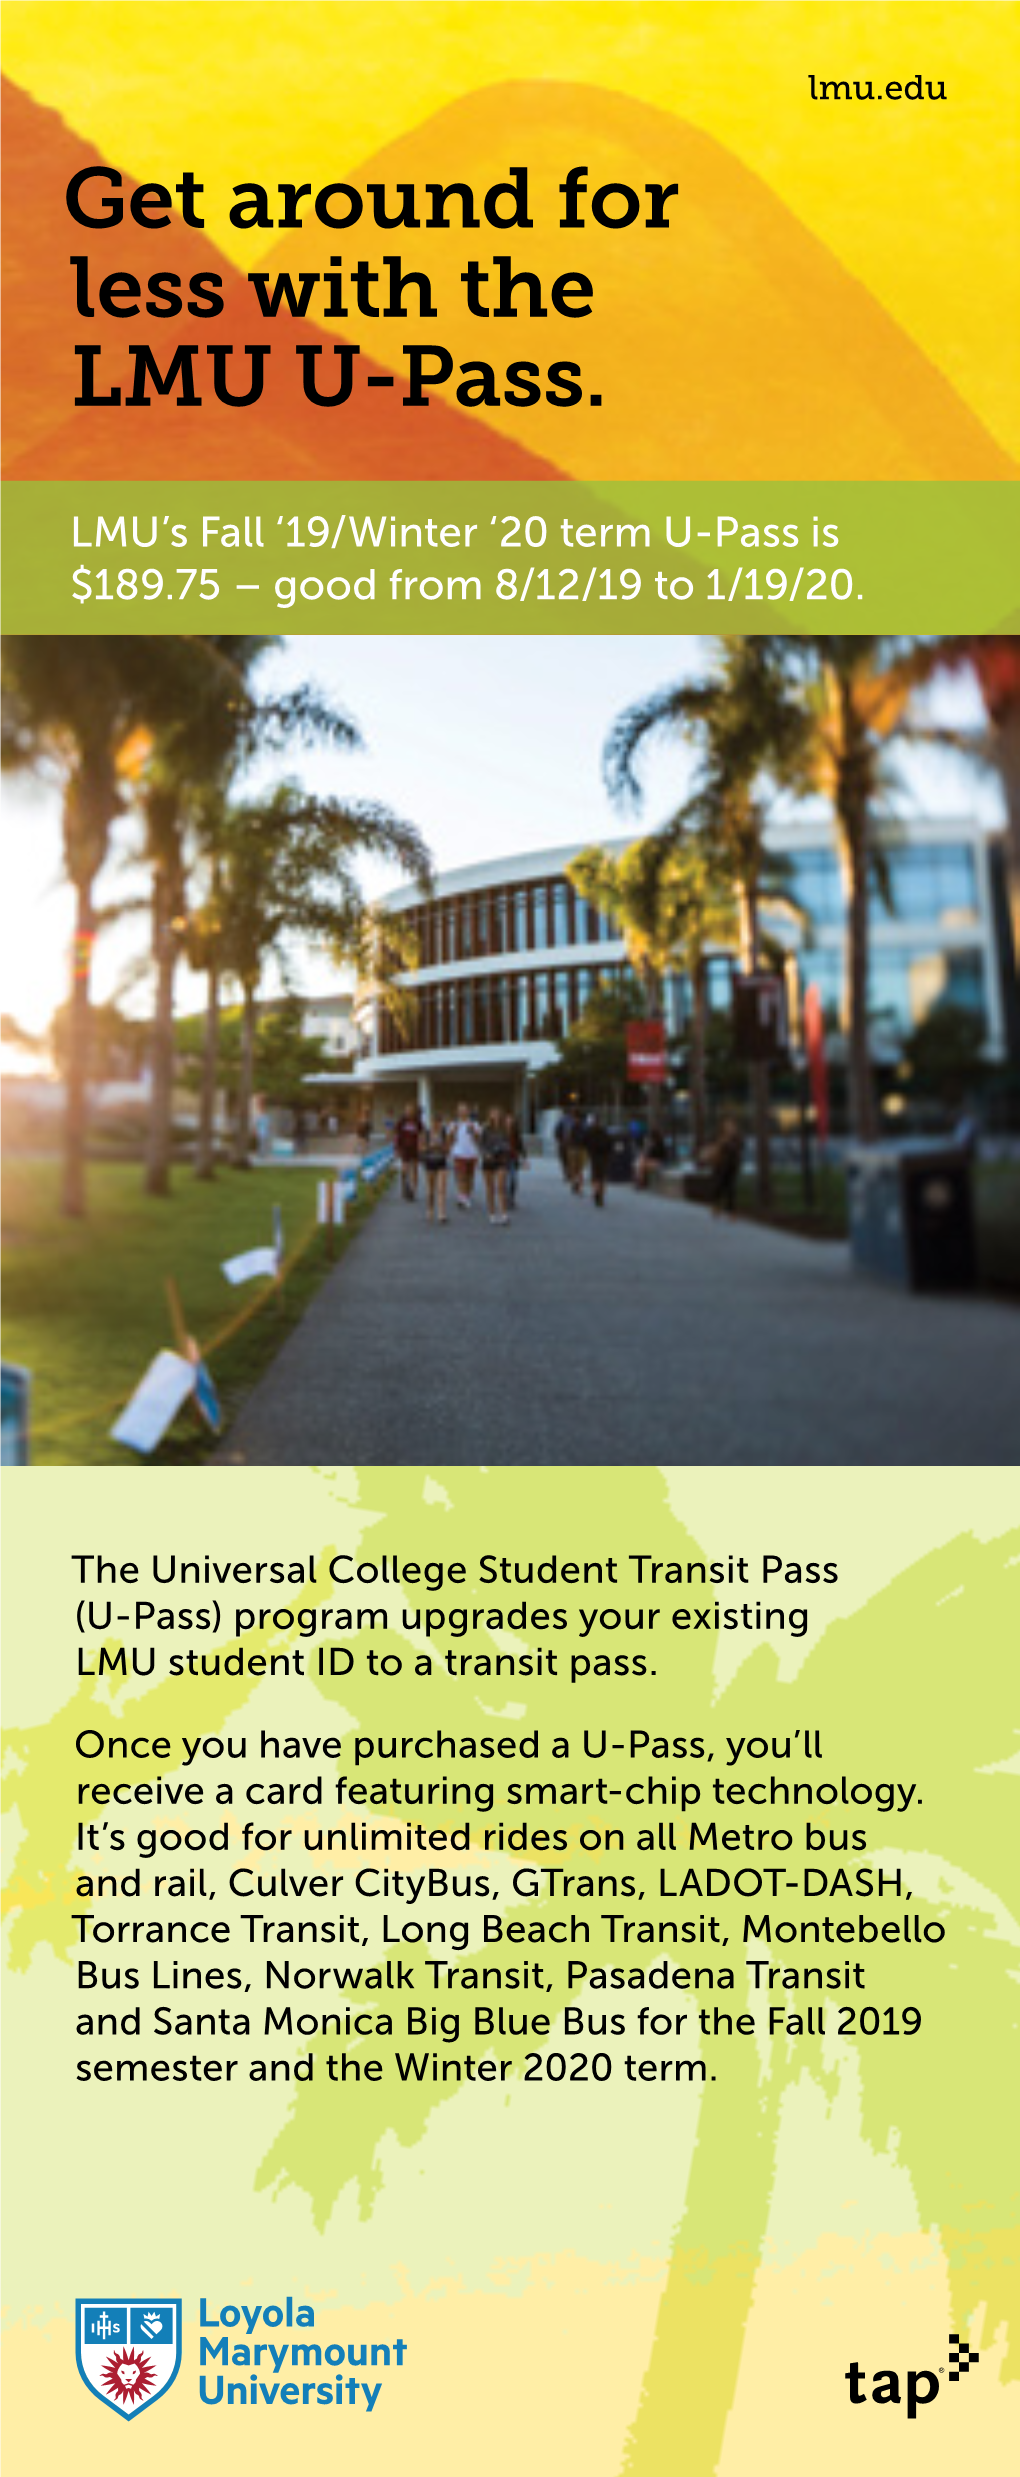 Get Around for Less with the LMU U-Pass